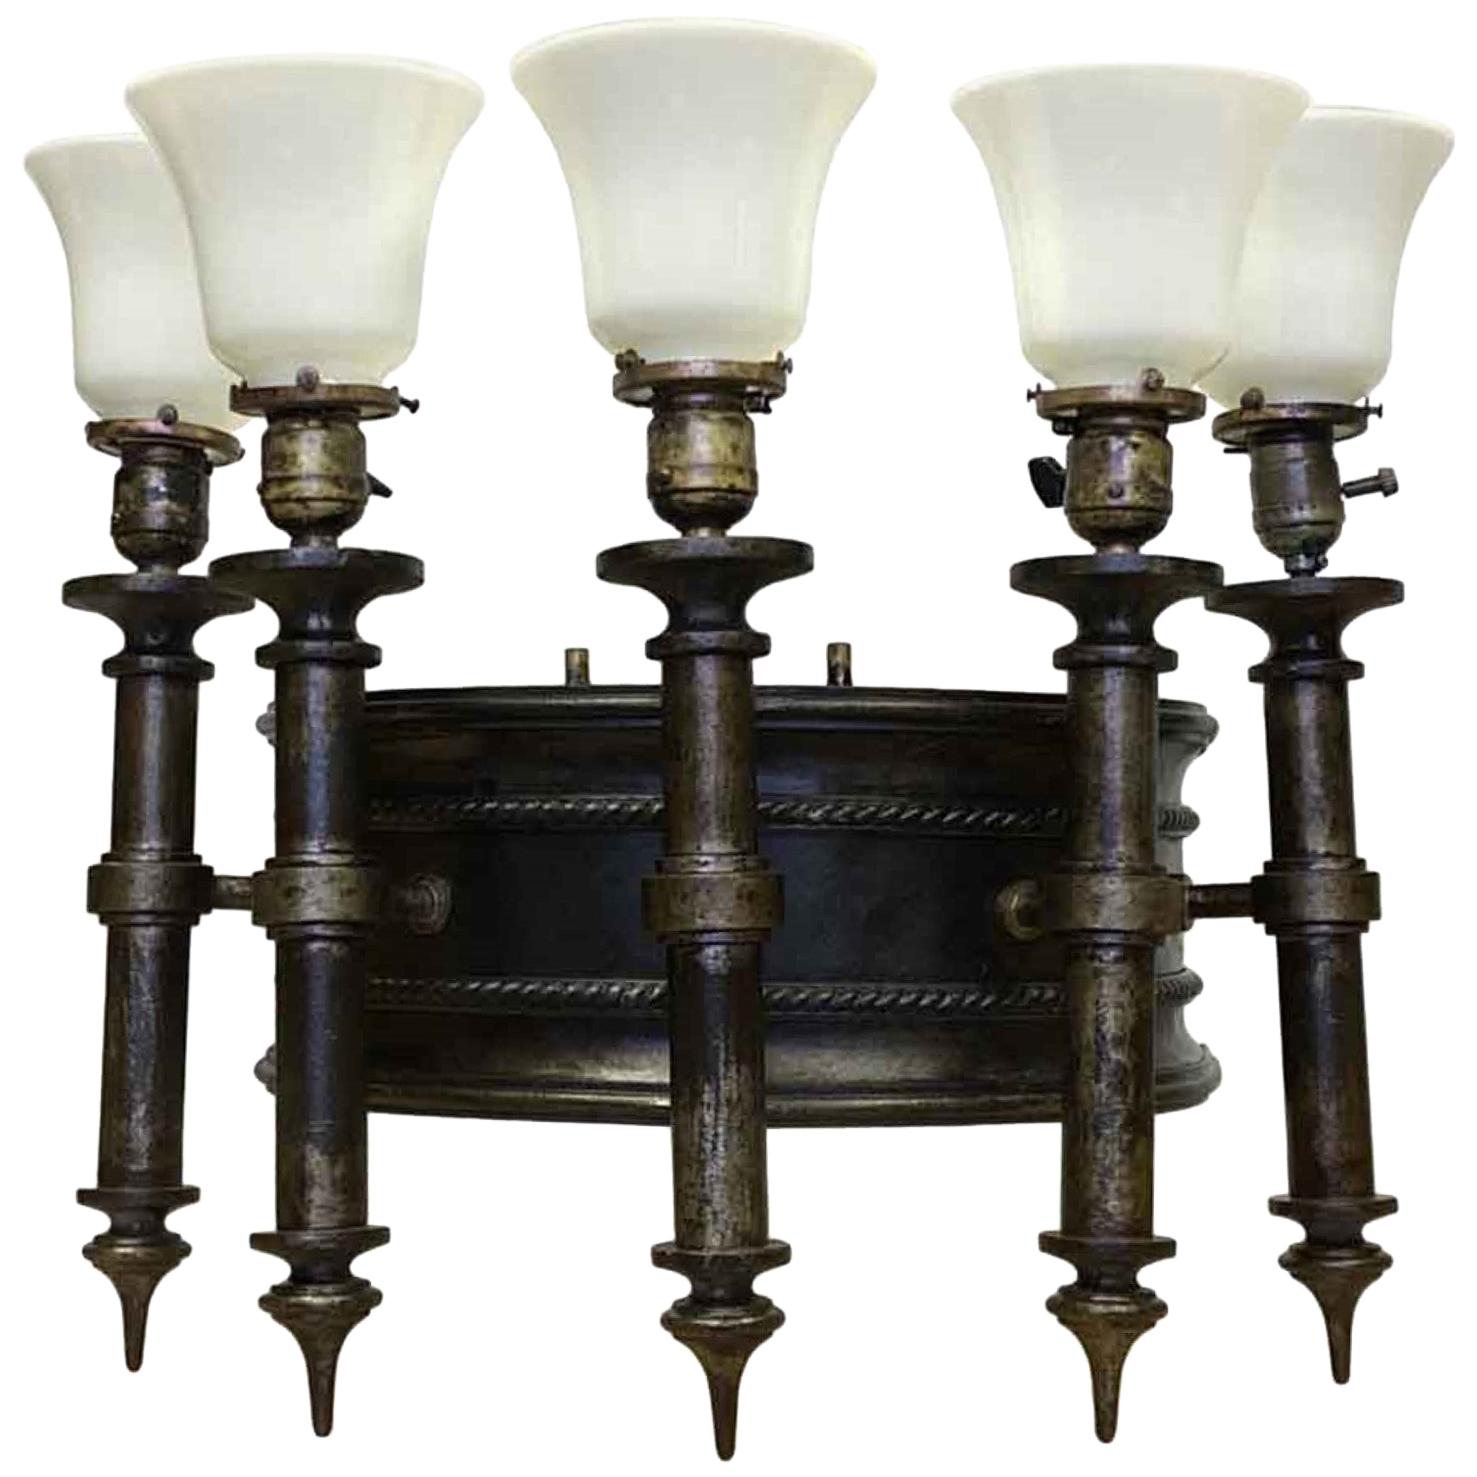 Medieval Wall Lights and Sconces - 26 For Sale at 1stDibs 